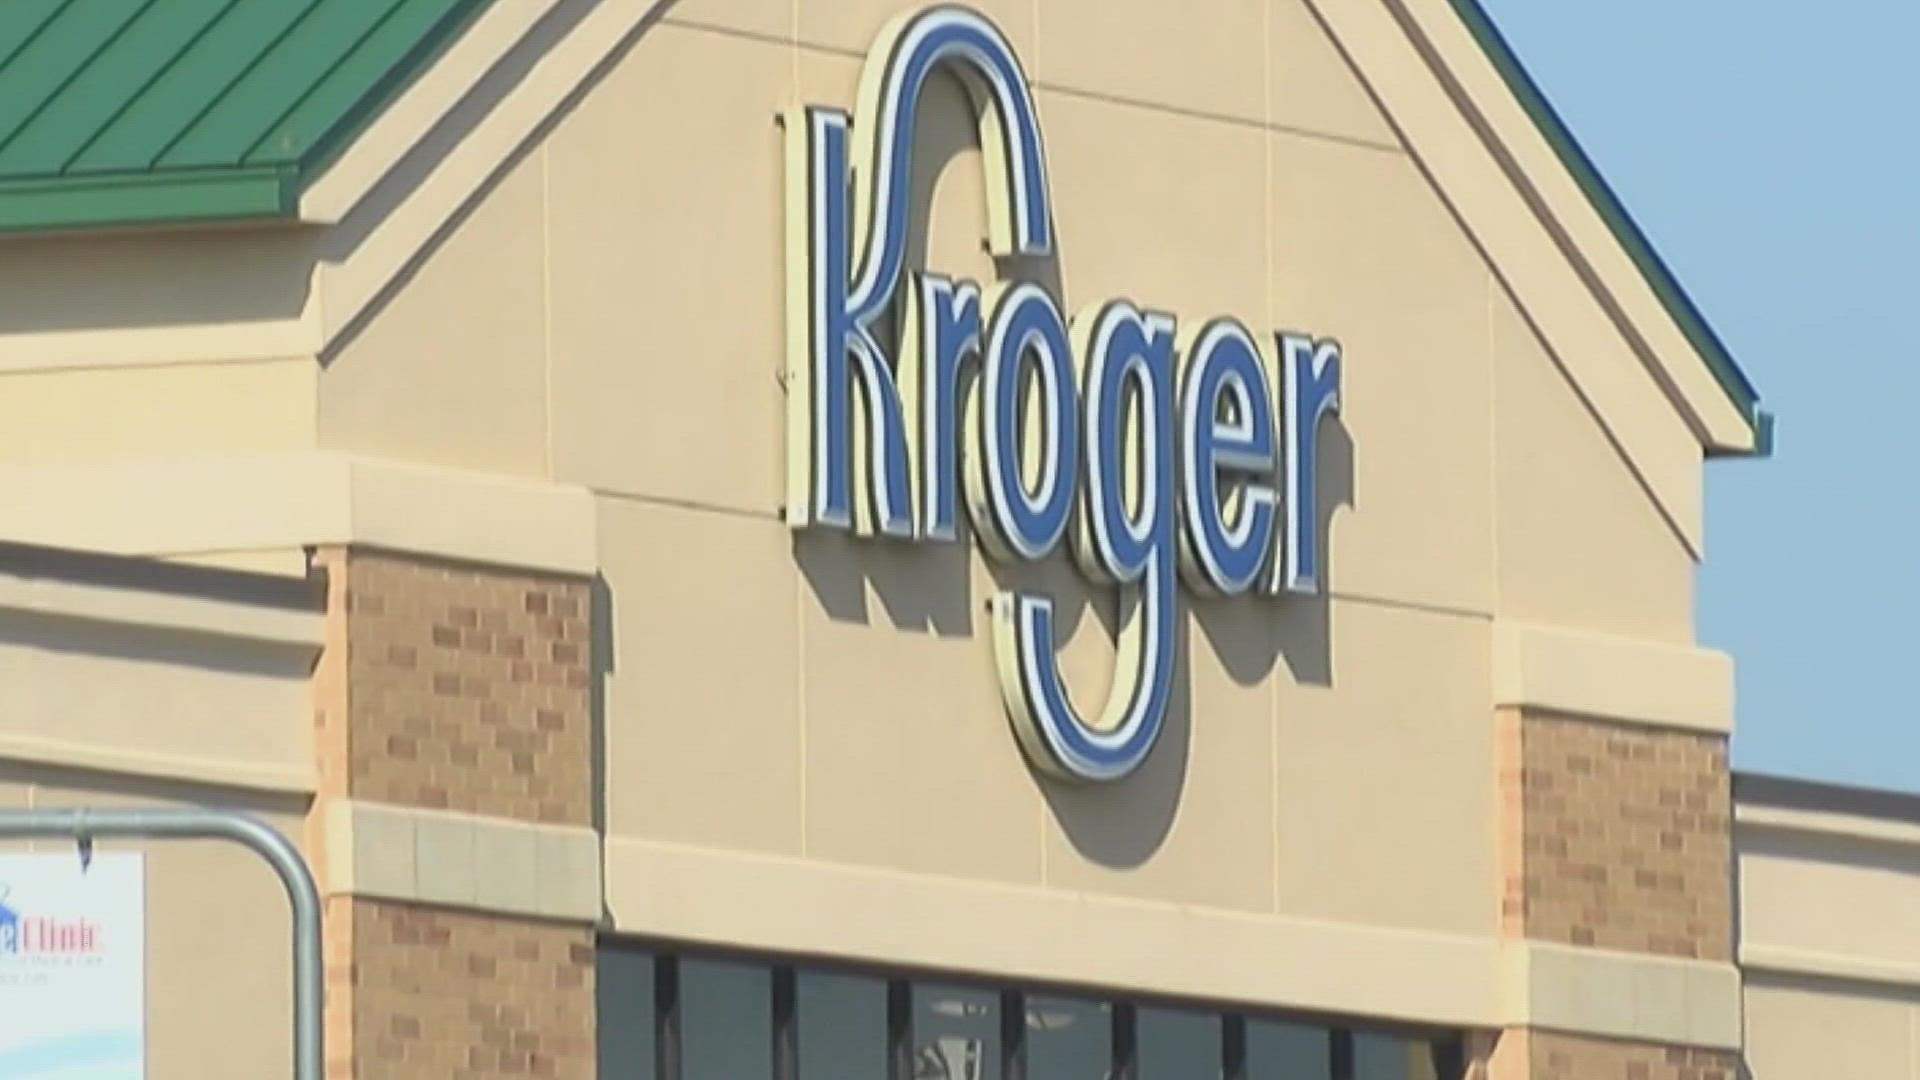 Congress is hearing testimony today about the proposed merger between Kroger and Albertson's.